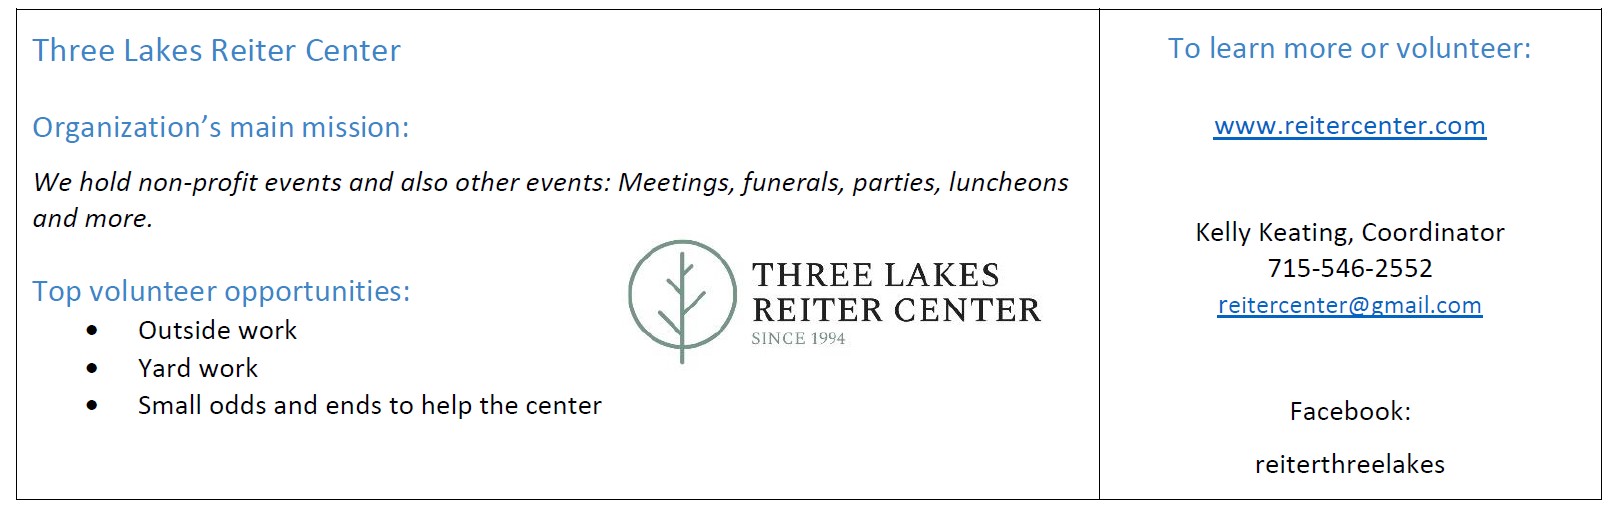 Volunteer opportunities at the Three Lakes Reiter Center